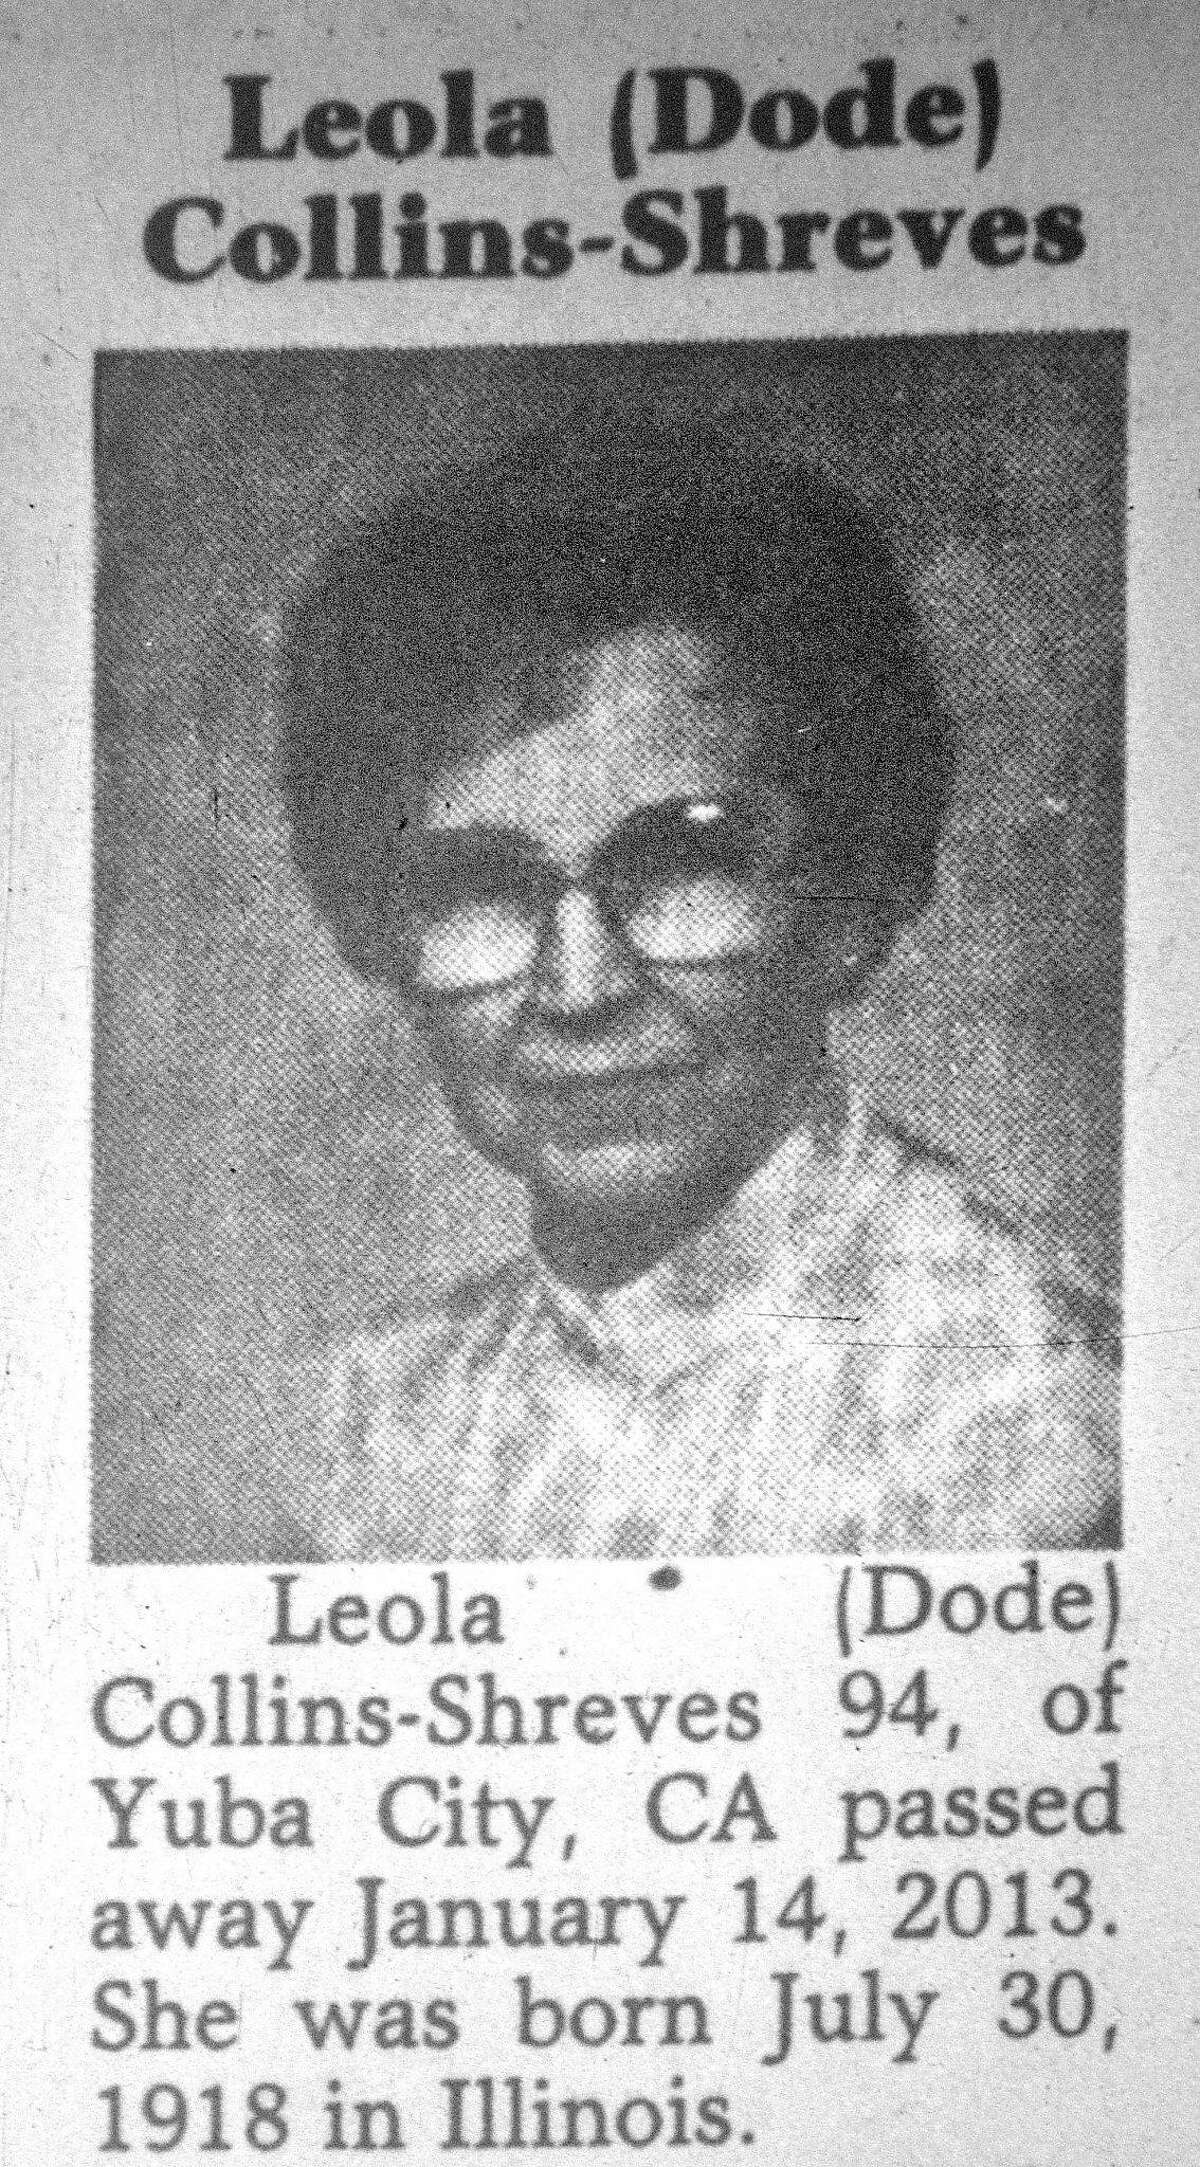 An obituary for Leola Shreves from a microfilm archive at the Sutter County Library in Marysville (Yuba County).